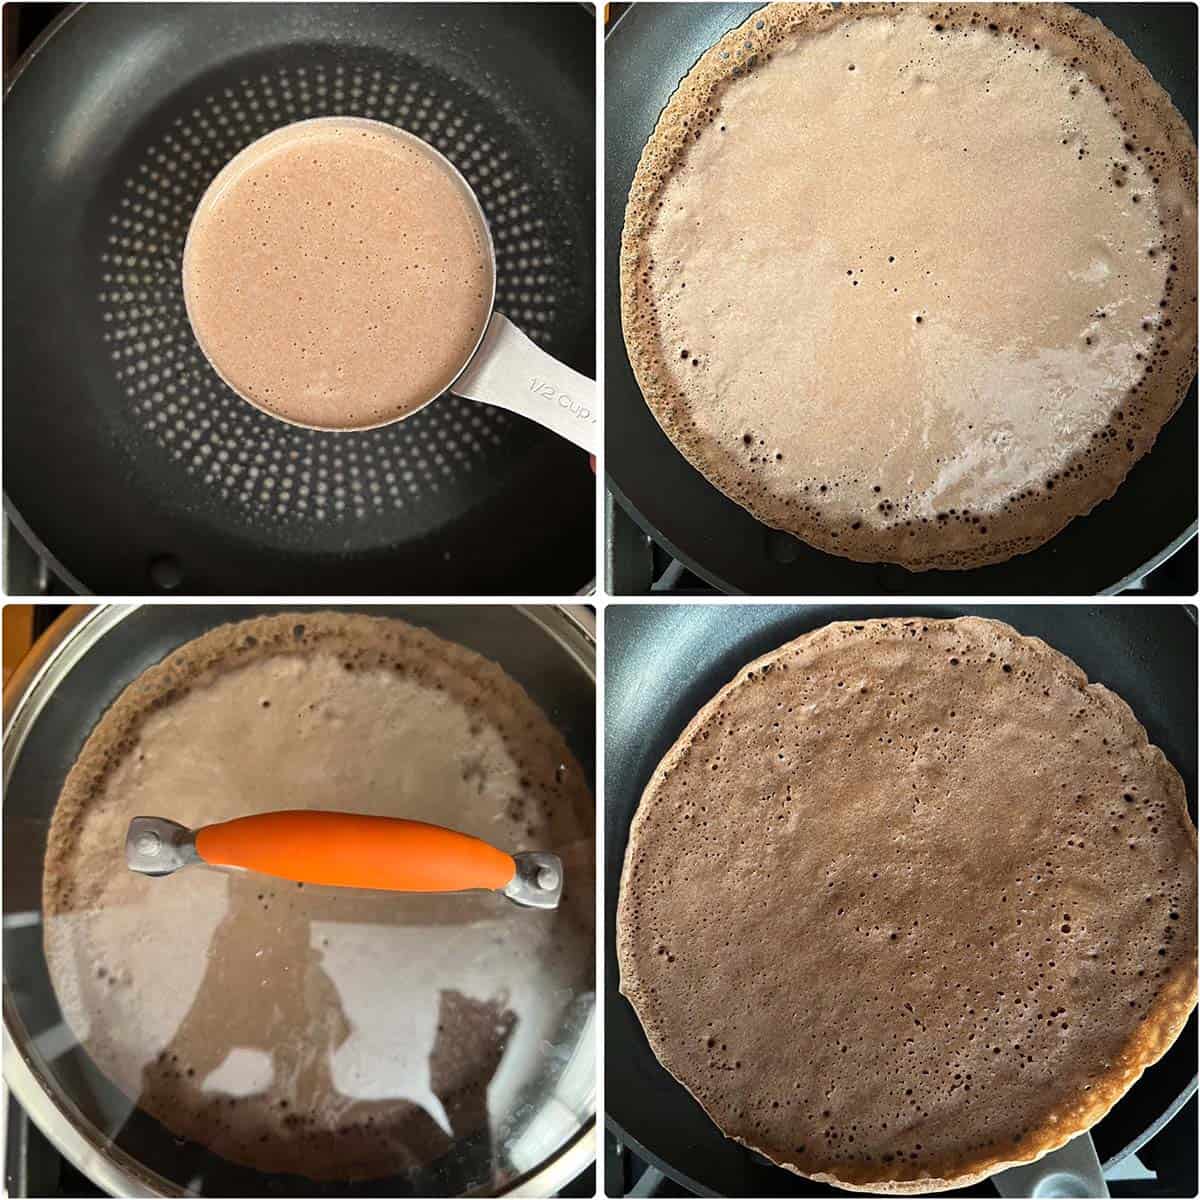 4 panel photo showing the making of Injera in a nonstick pan.